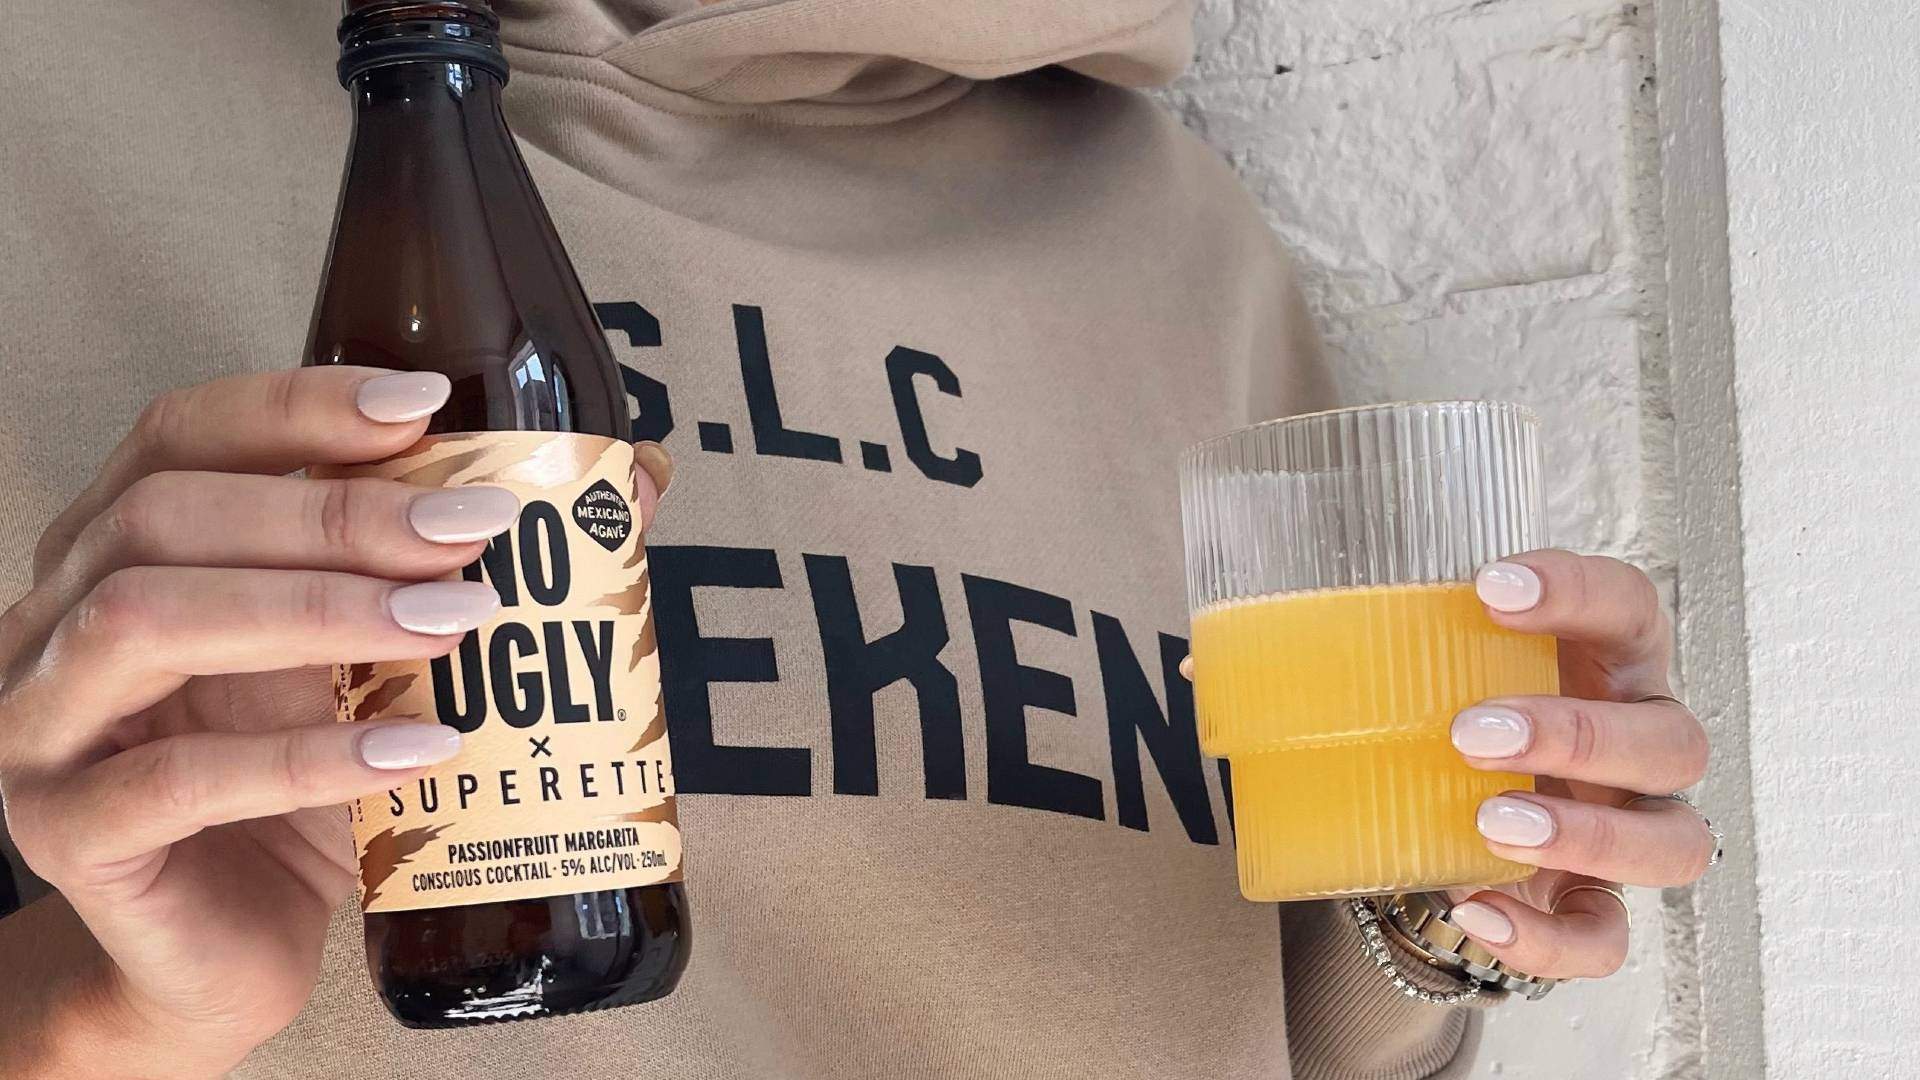 Superette and No Ugly Have Teamed Up to Create a Bottled Passionfruit Margarita